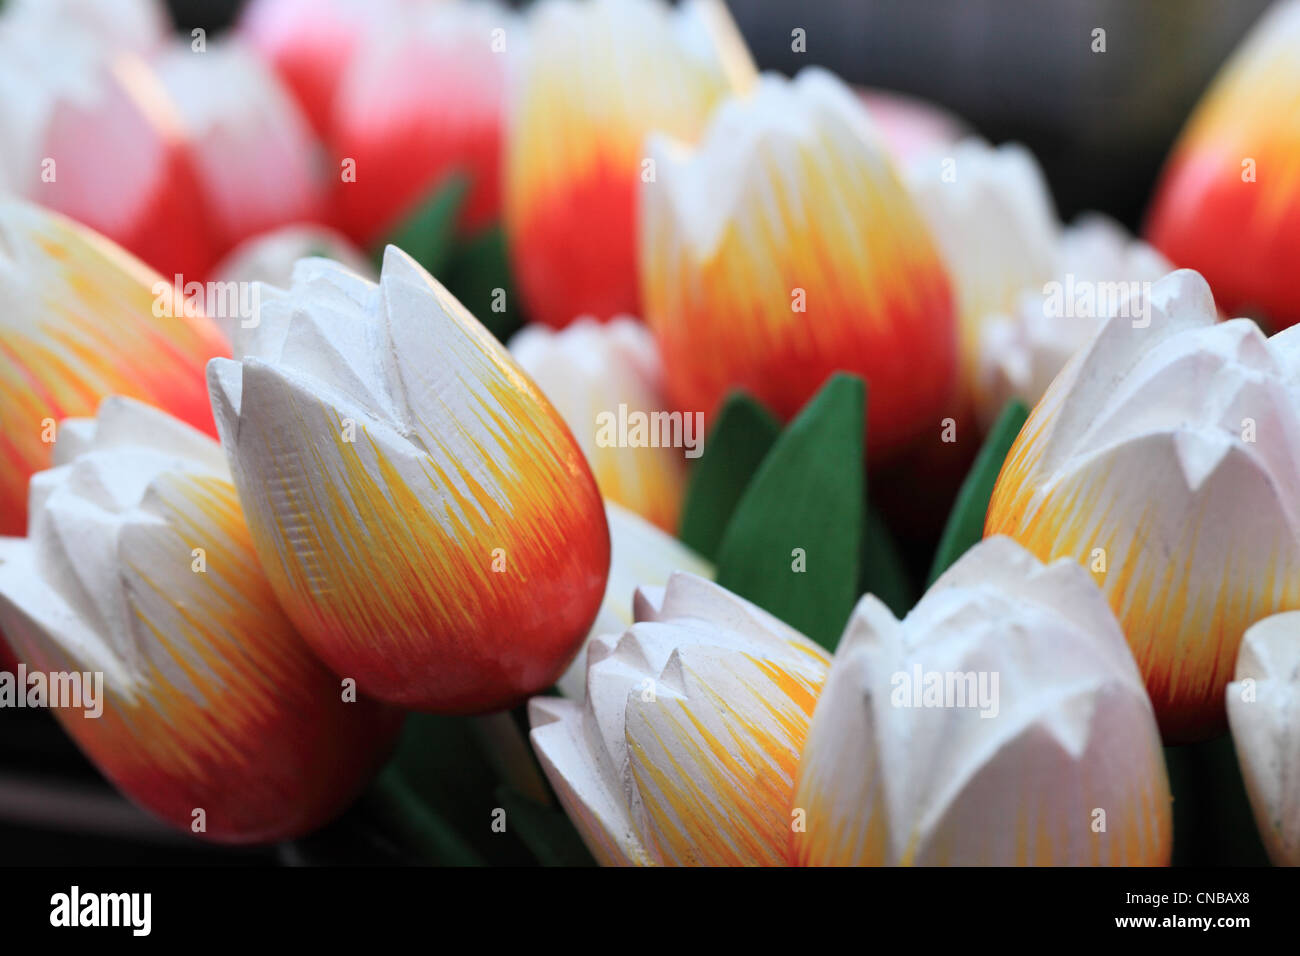 Image of colorful wooden tulips on a market stand in Amsterdam. Stock Photo